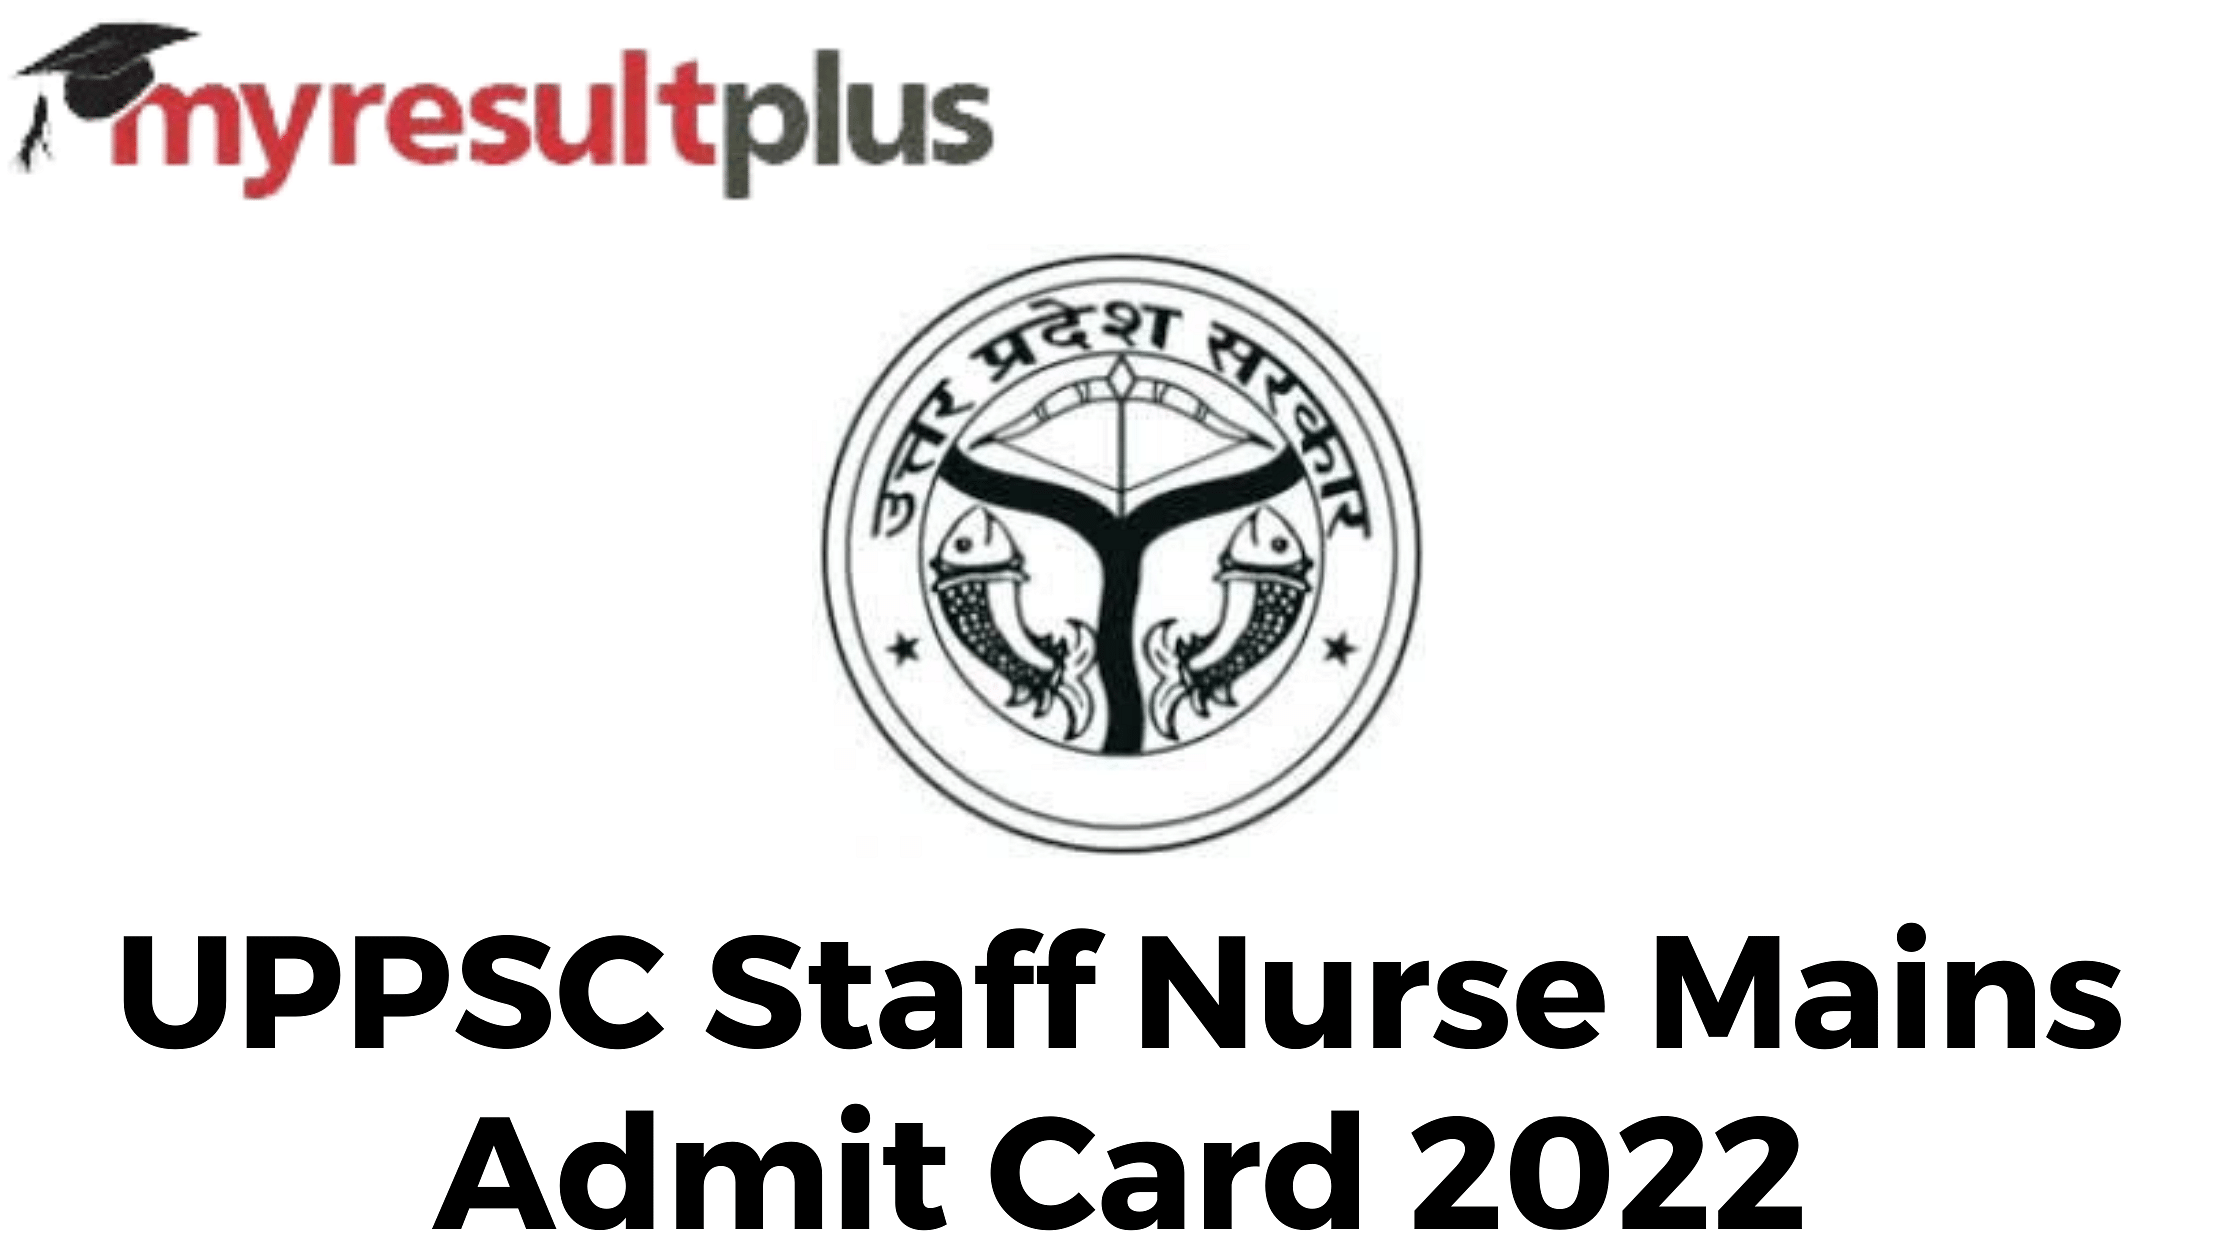 UPPSC Staff Nurse Mains 2022: Admit Card Out, Here's Direct Link to Download